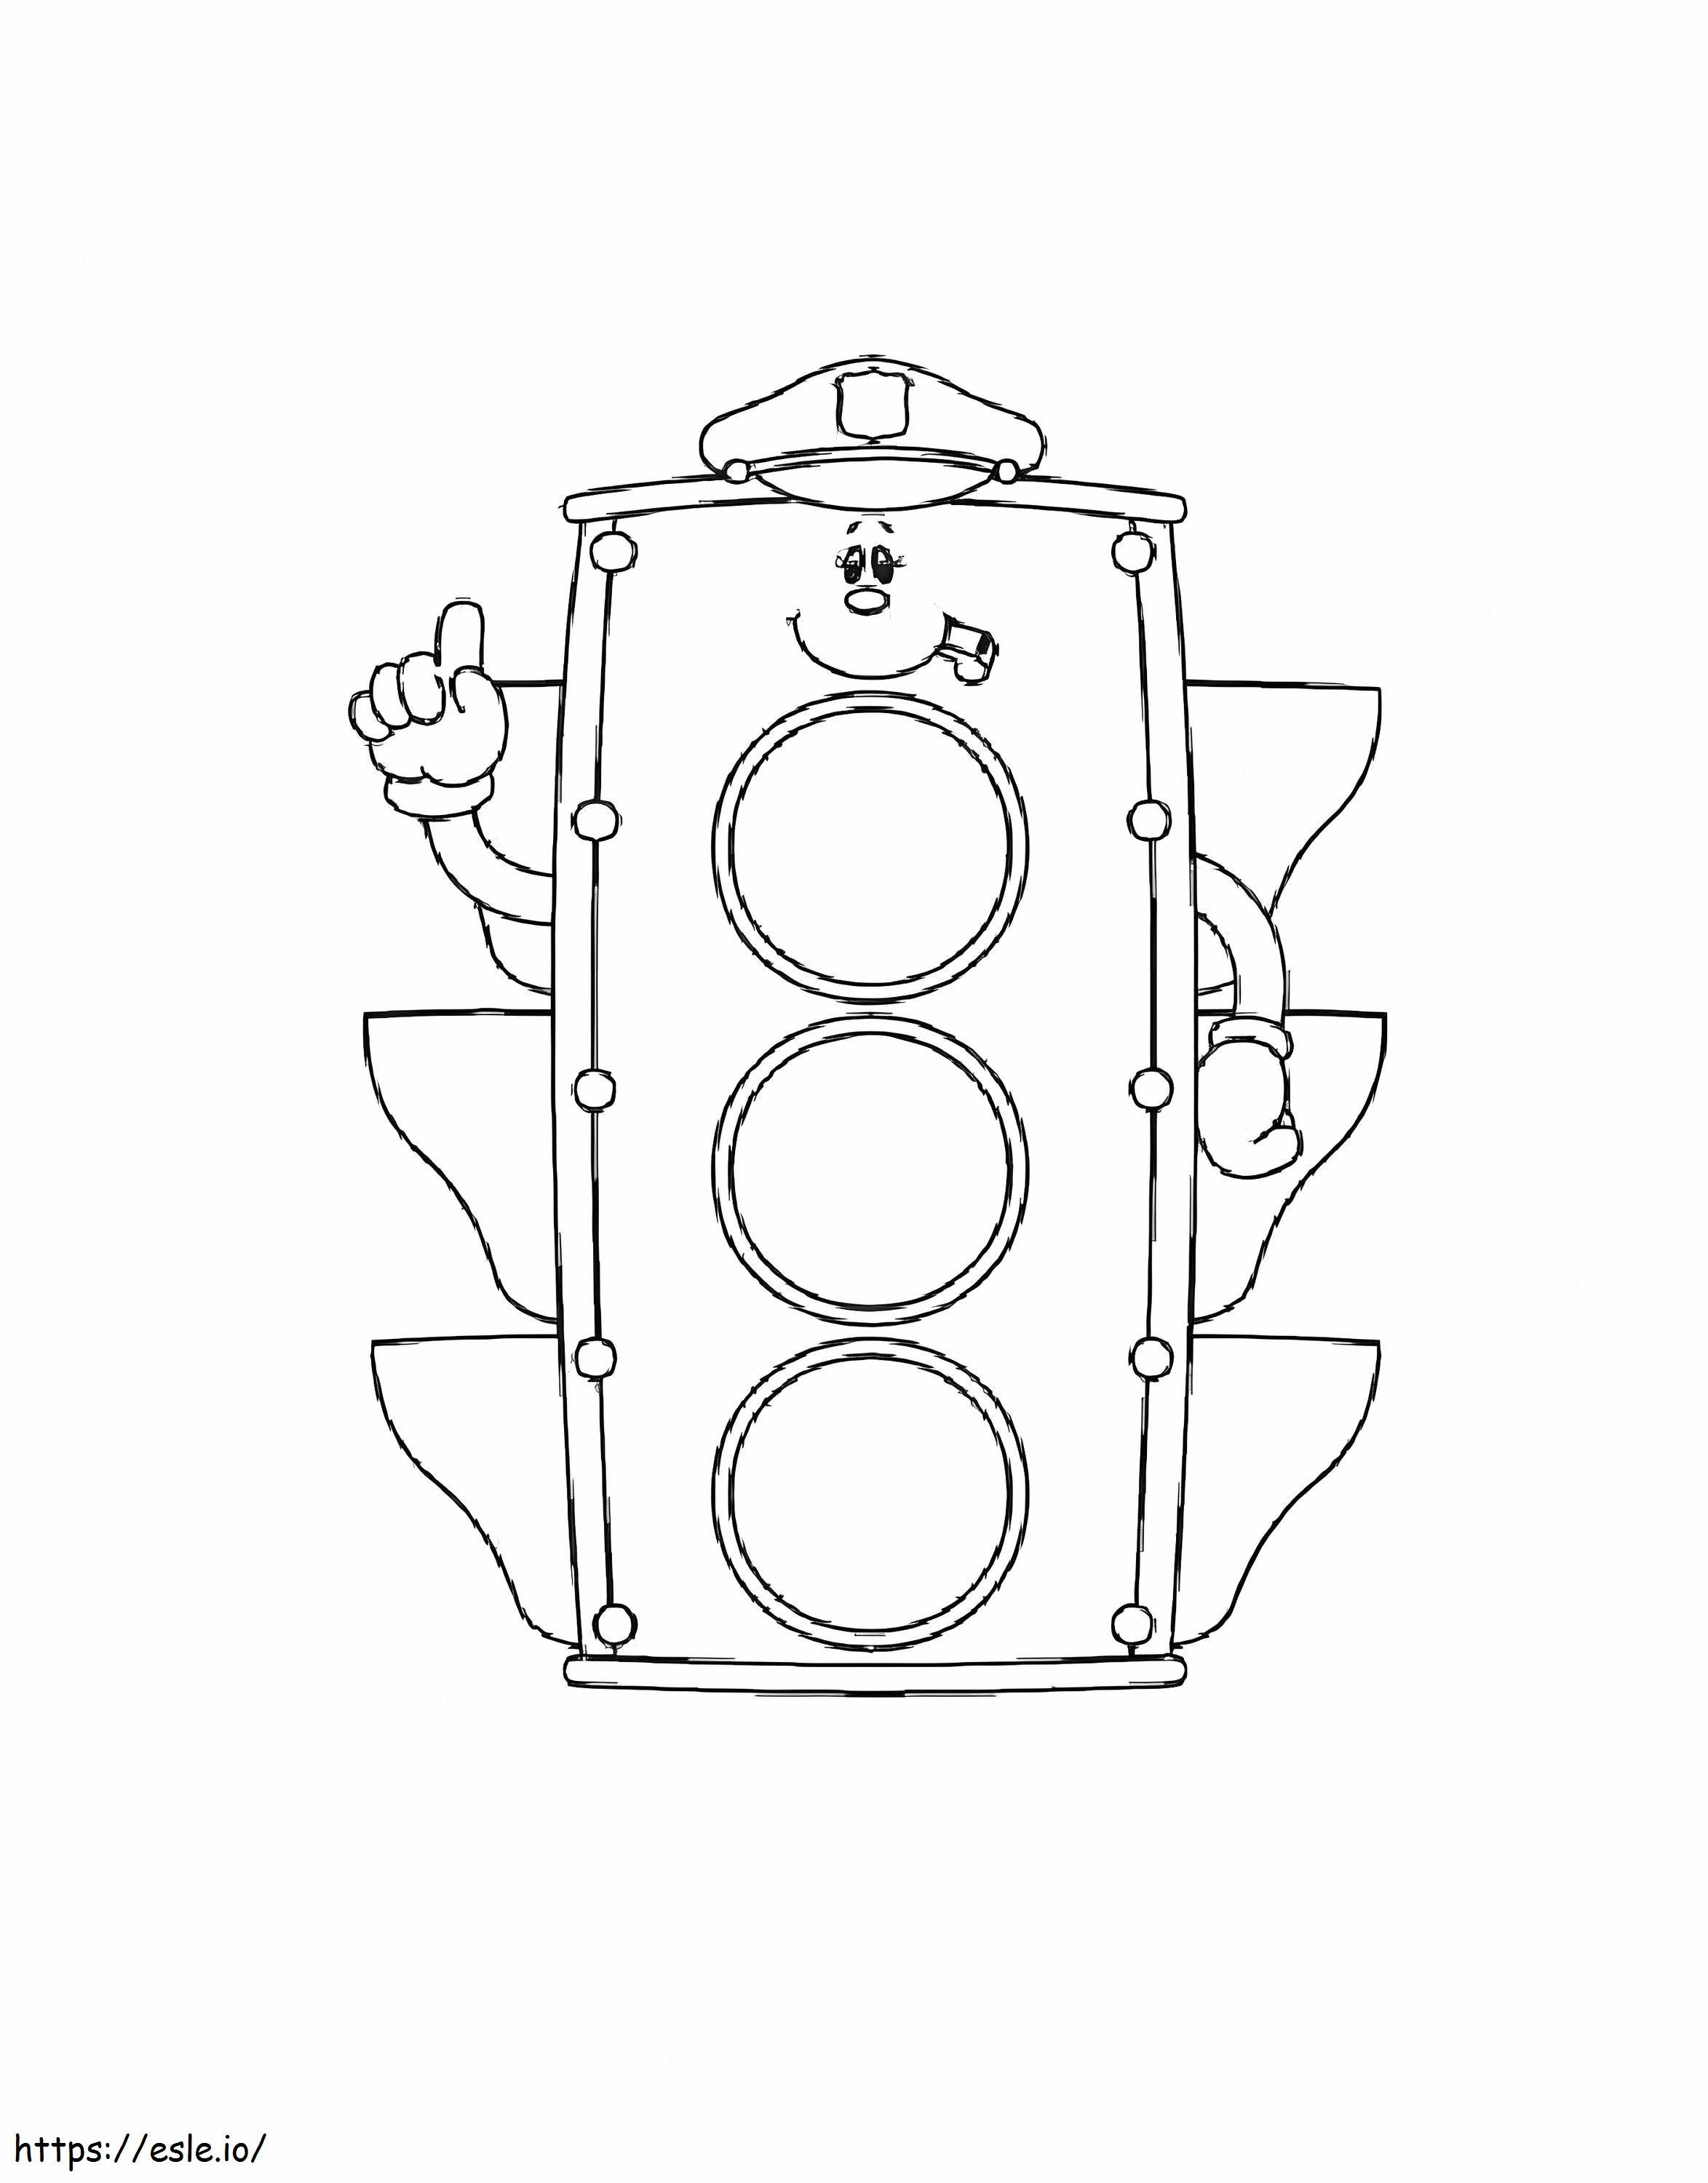 Smiling Traffic Light coloring page